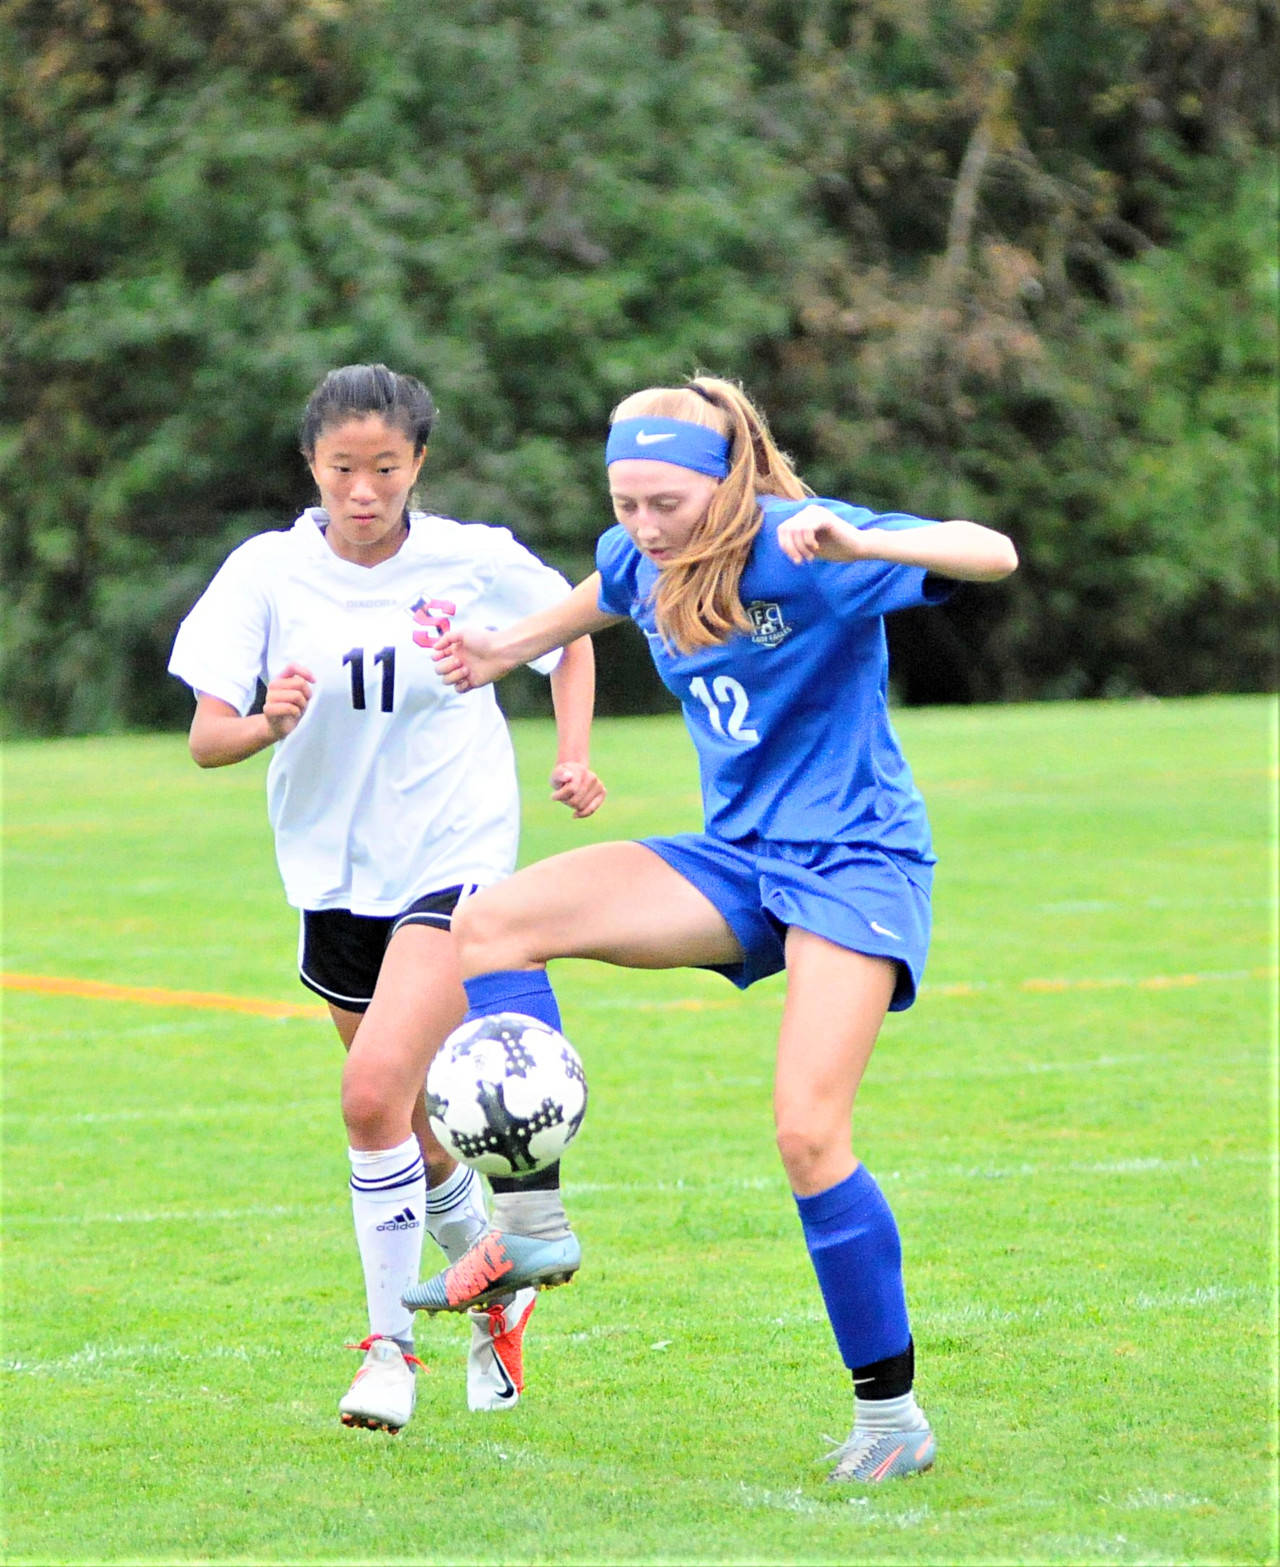 Elma’s Jillian Bieker (12) protects the ball from Shelton’s Mei Ping Vernon in the first half of a game at Davis Field in Elma on Saturday afternoon. (Hasani Grayson | Grays Harbor News Group)